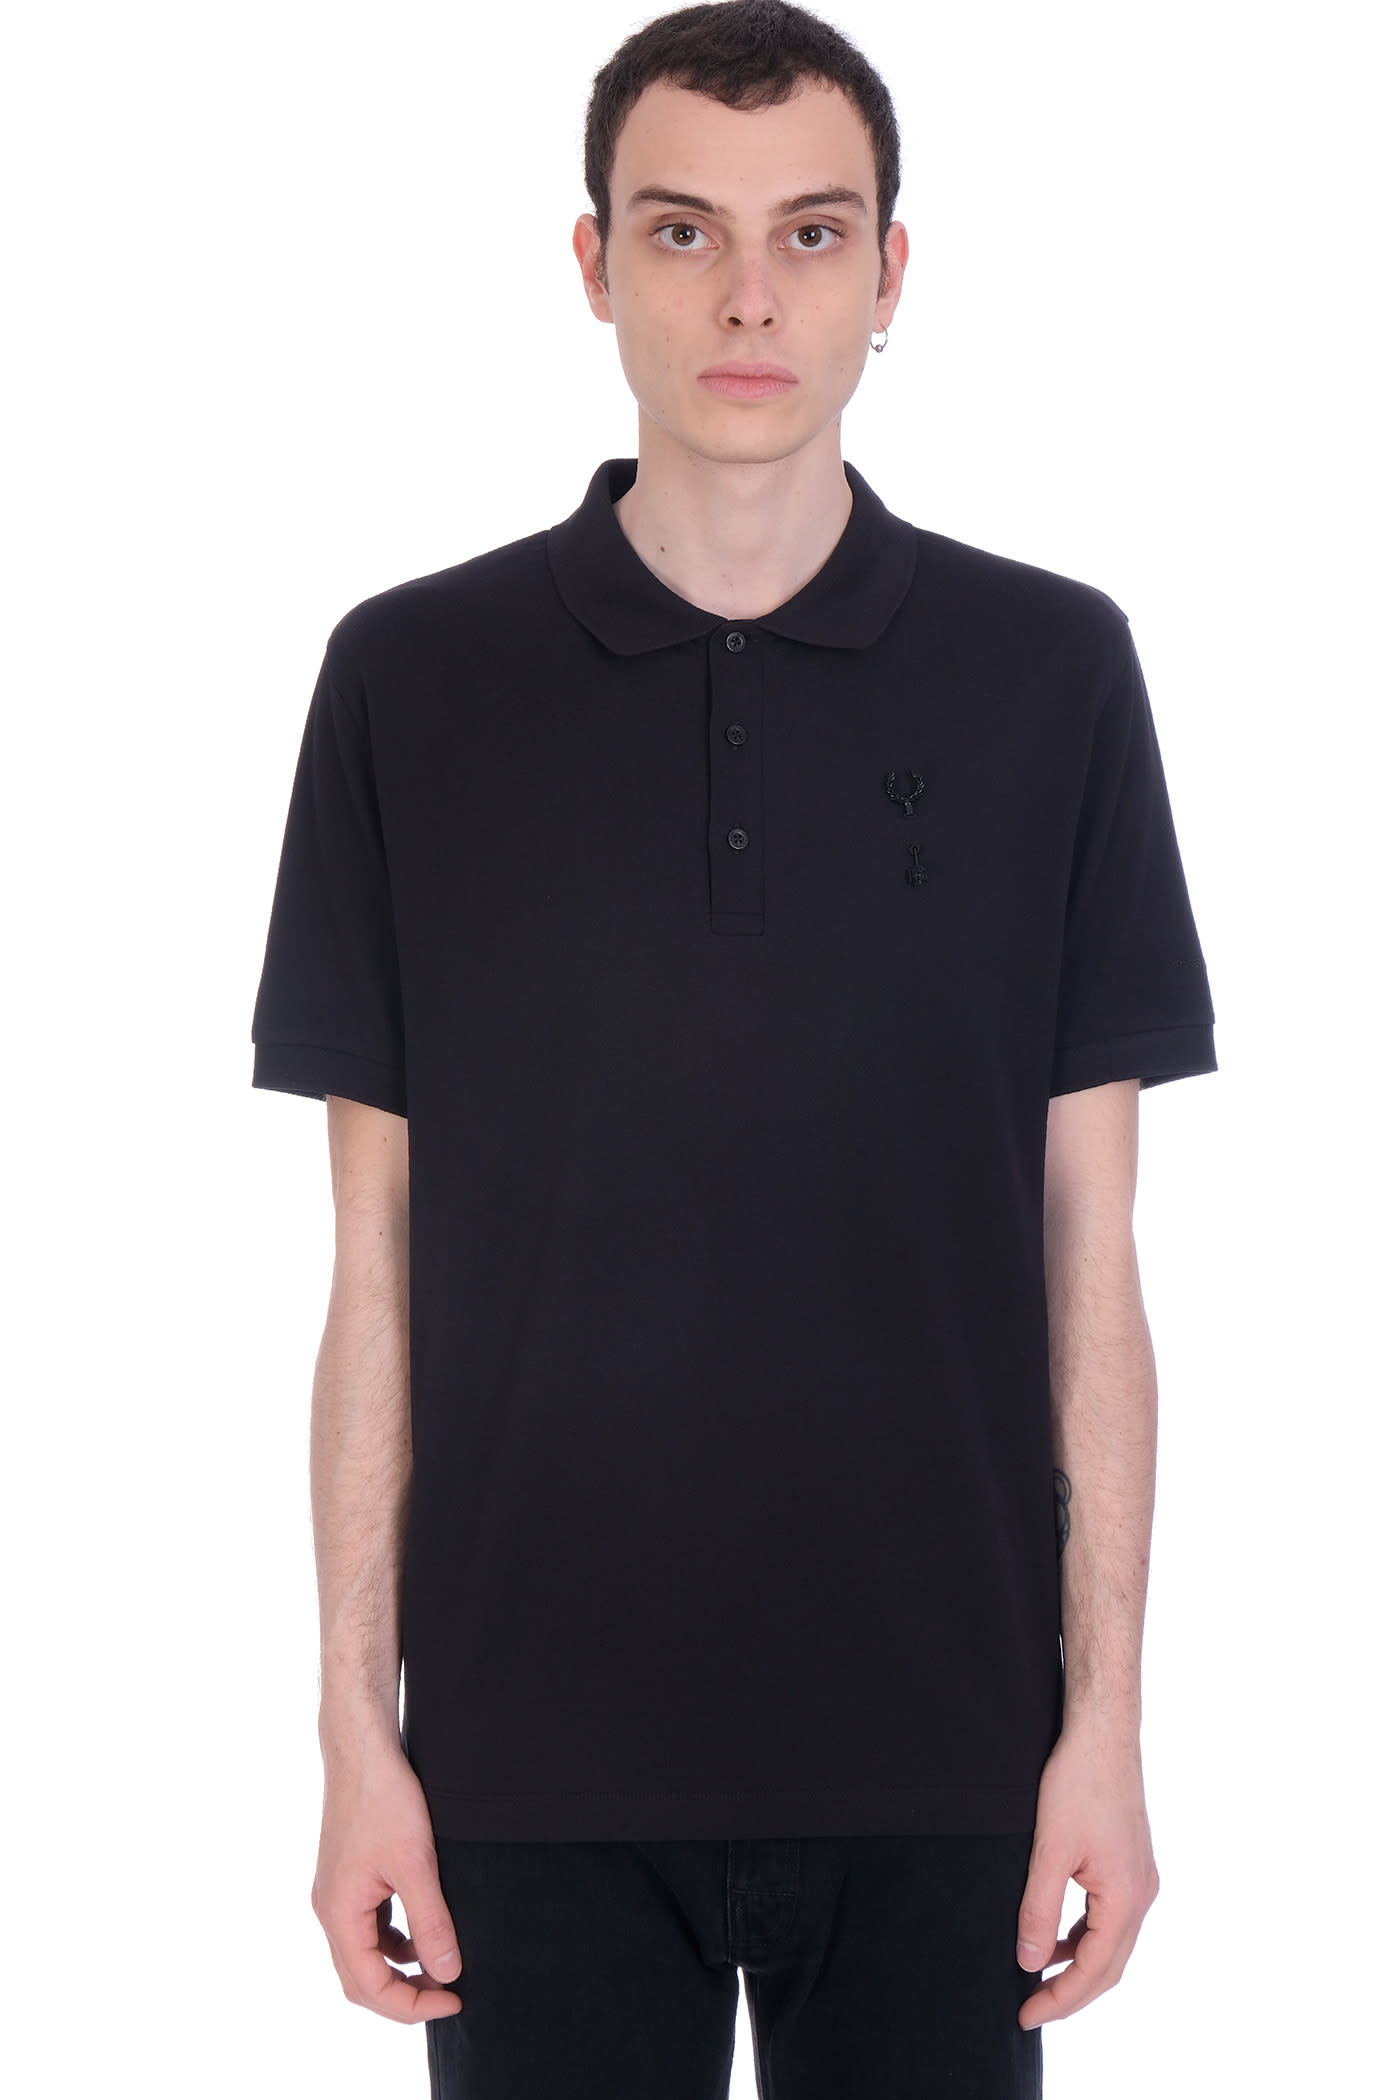 Fred Perry by Raf Simons Polo In Black Cotton